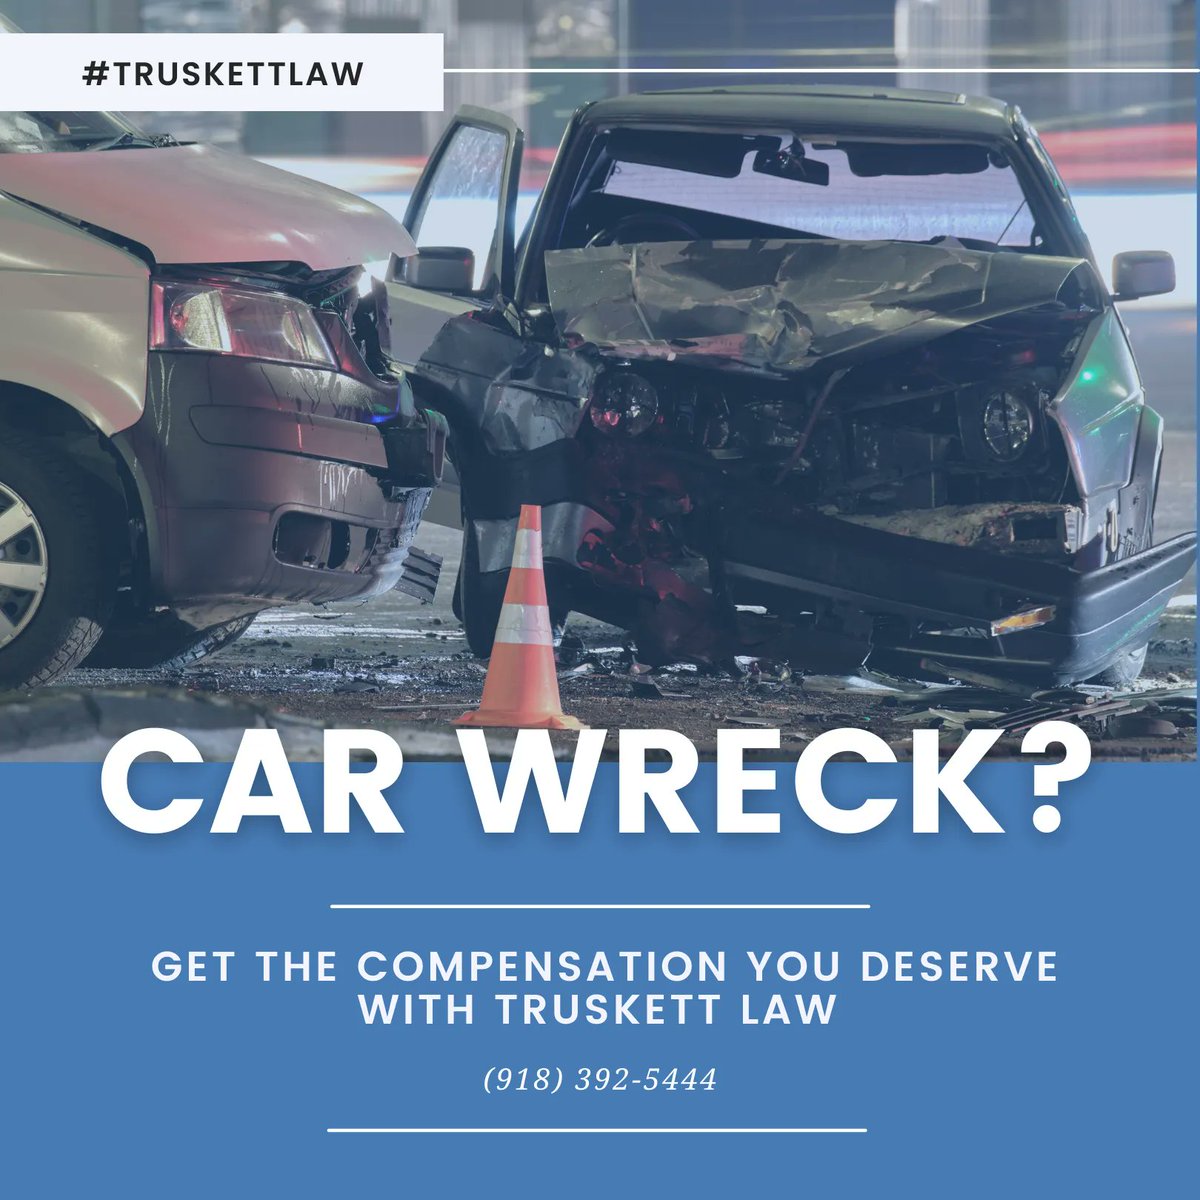 Don't let a car wreck leave you feeling helpless. Truskett Law is here to help you get back on your feet. Our skilled attorneys will fight for you and help you get the compensation you deserve. Schedule a free consultation today. #TruskettLaw #CarWreckAttorneys #JusticeForYou